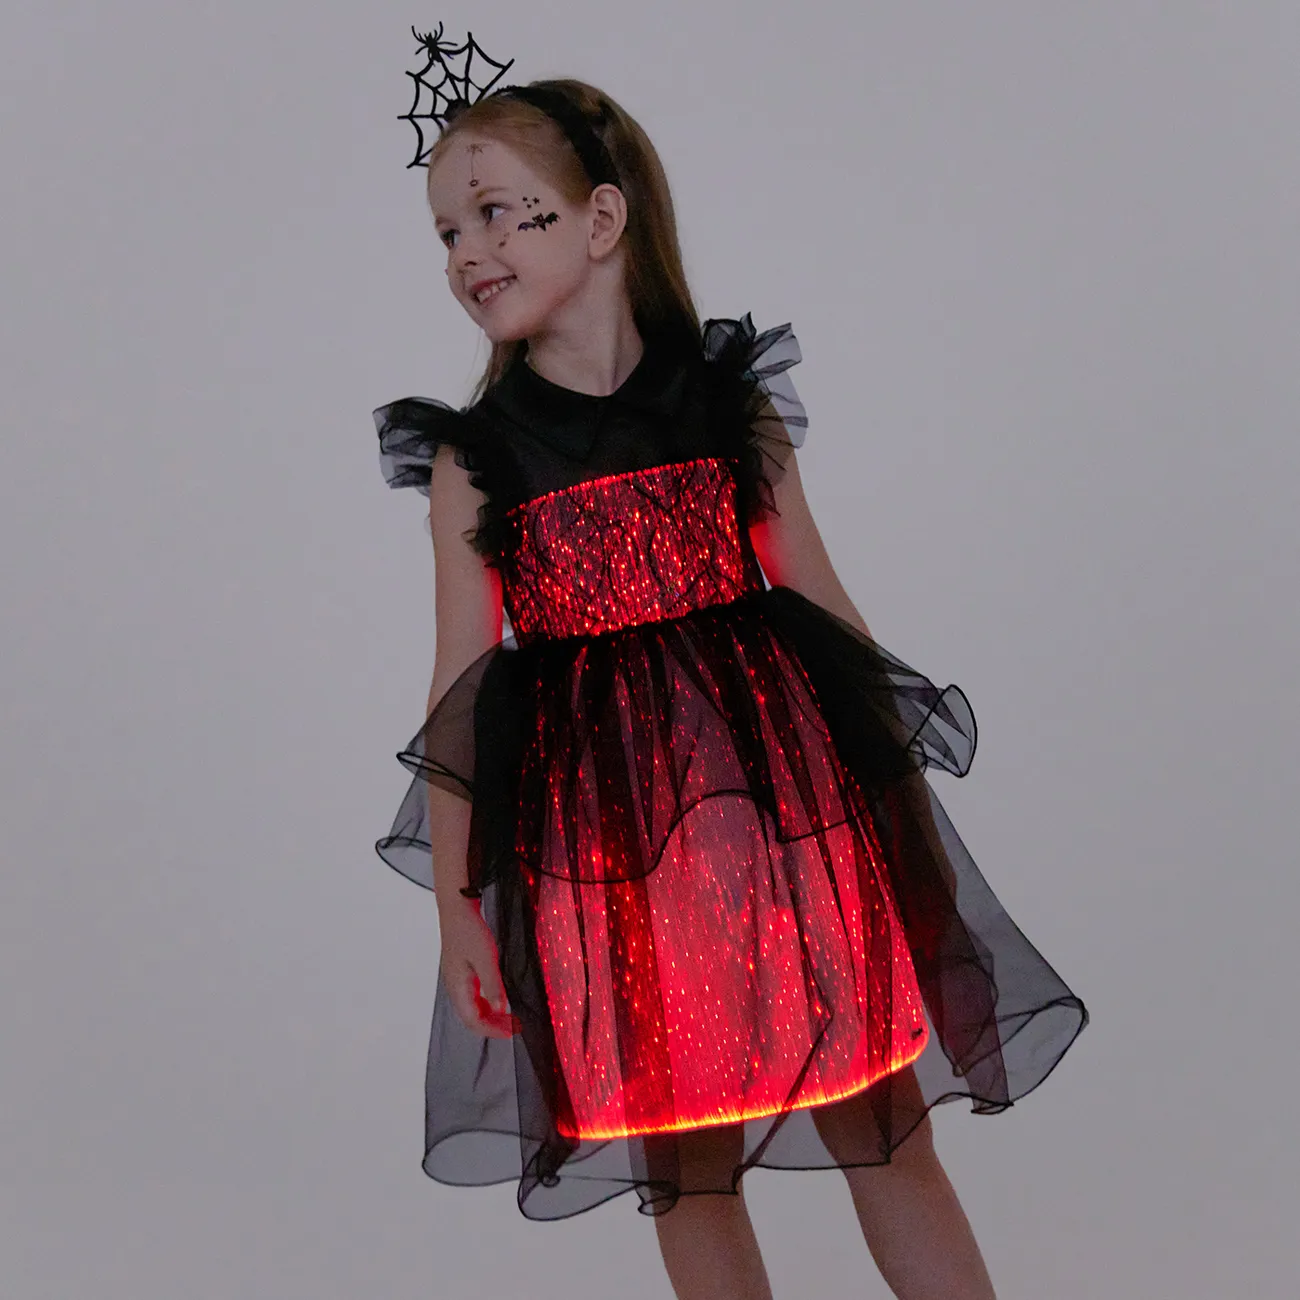 Go-Glow Wednesday Look Illuminating Black Dress with Light Up Layered Tulle Skirt Including Controller (Built-In Battery) Black big image 1